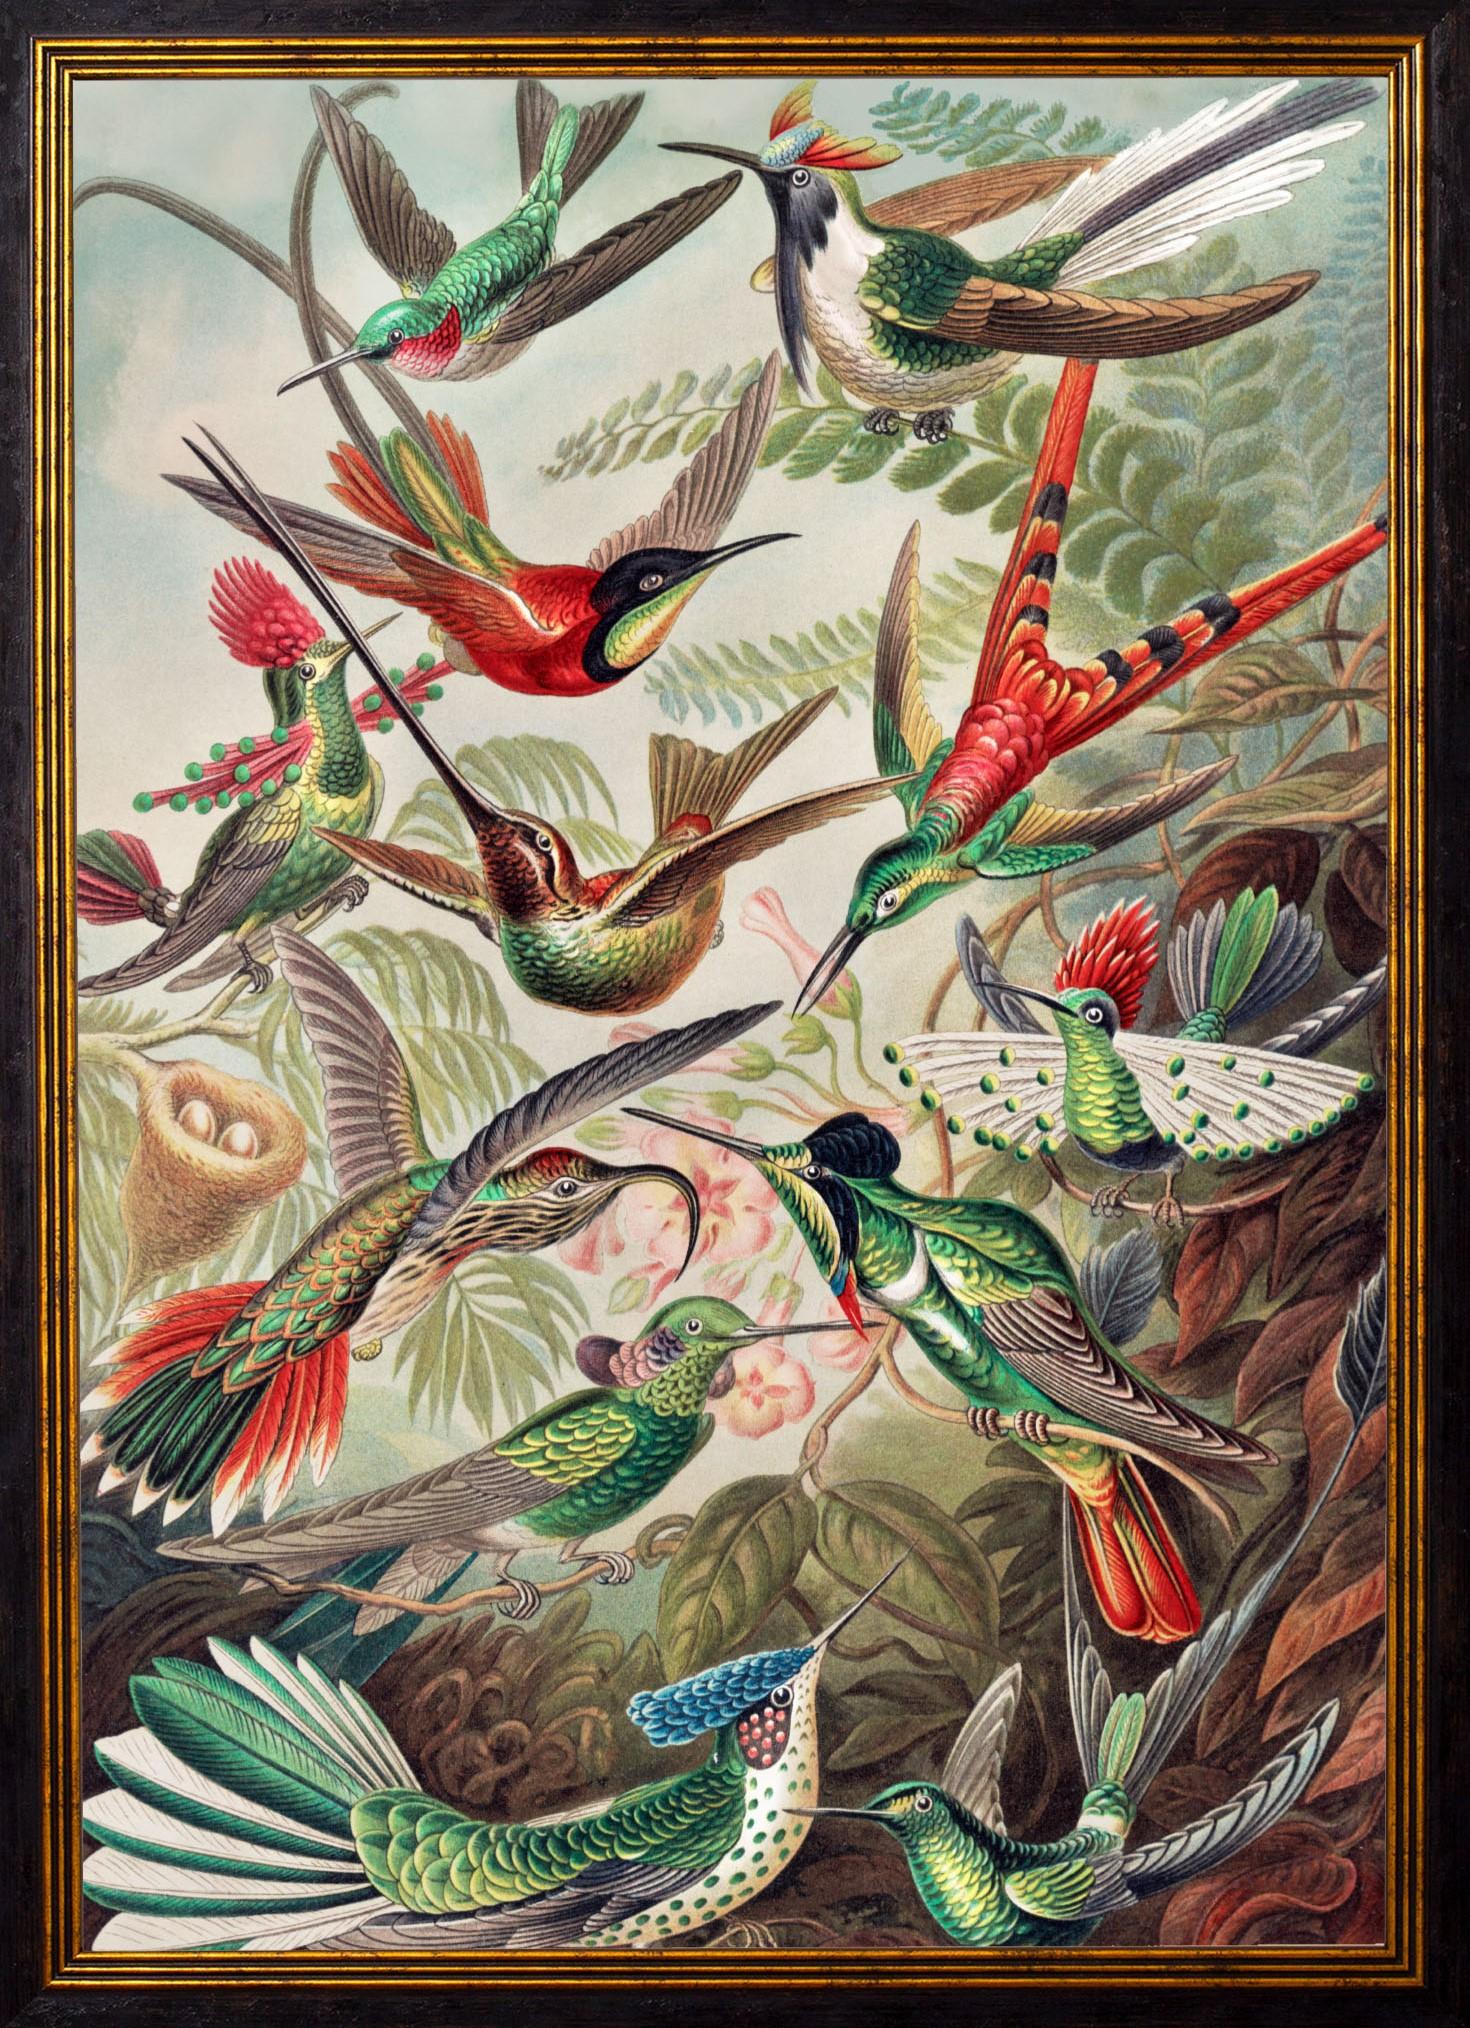 This stunning print of Hummingbirds references a beautiful print from the 1900s by Ernst Haeckel as per similar pieces; reference Sea anemones and Mosses from Ernst Haeckels Kunstformen der Natur (1904)

Prints of this style were originally printed